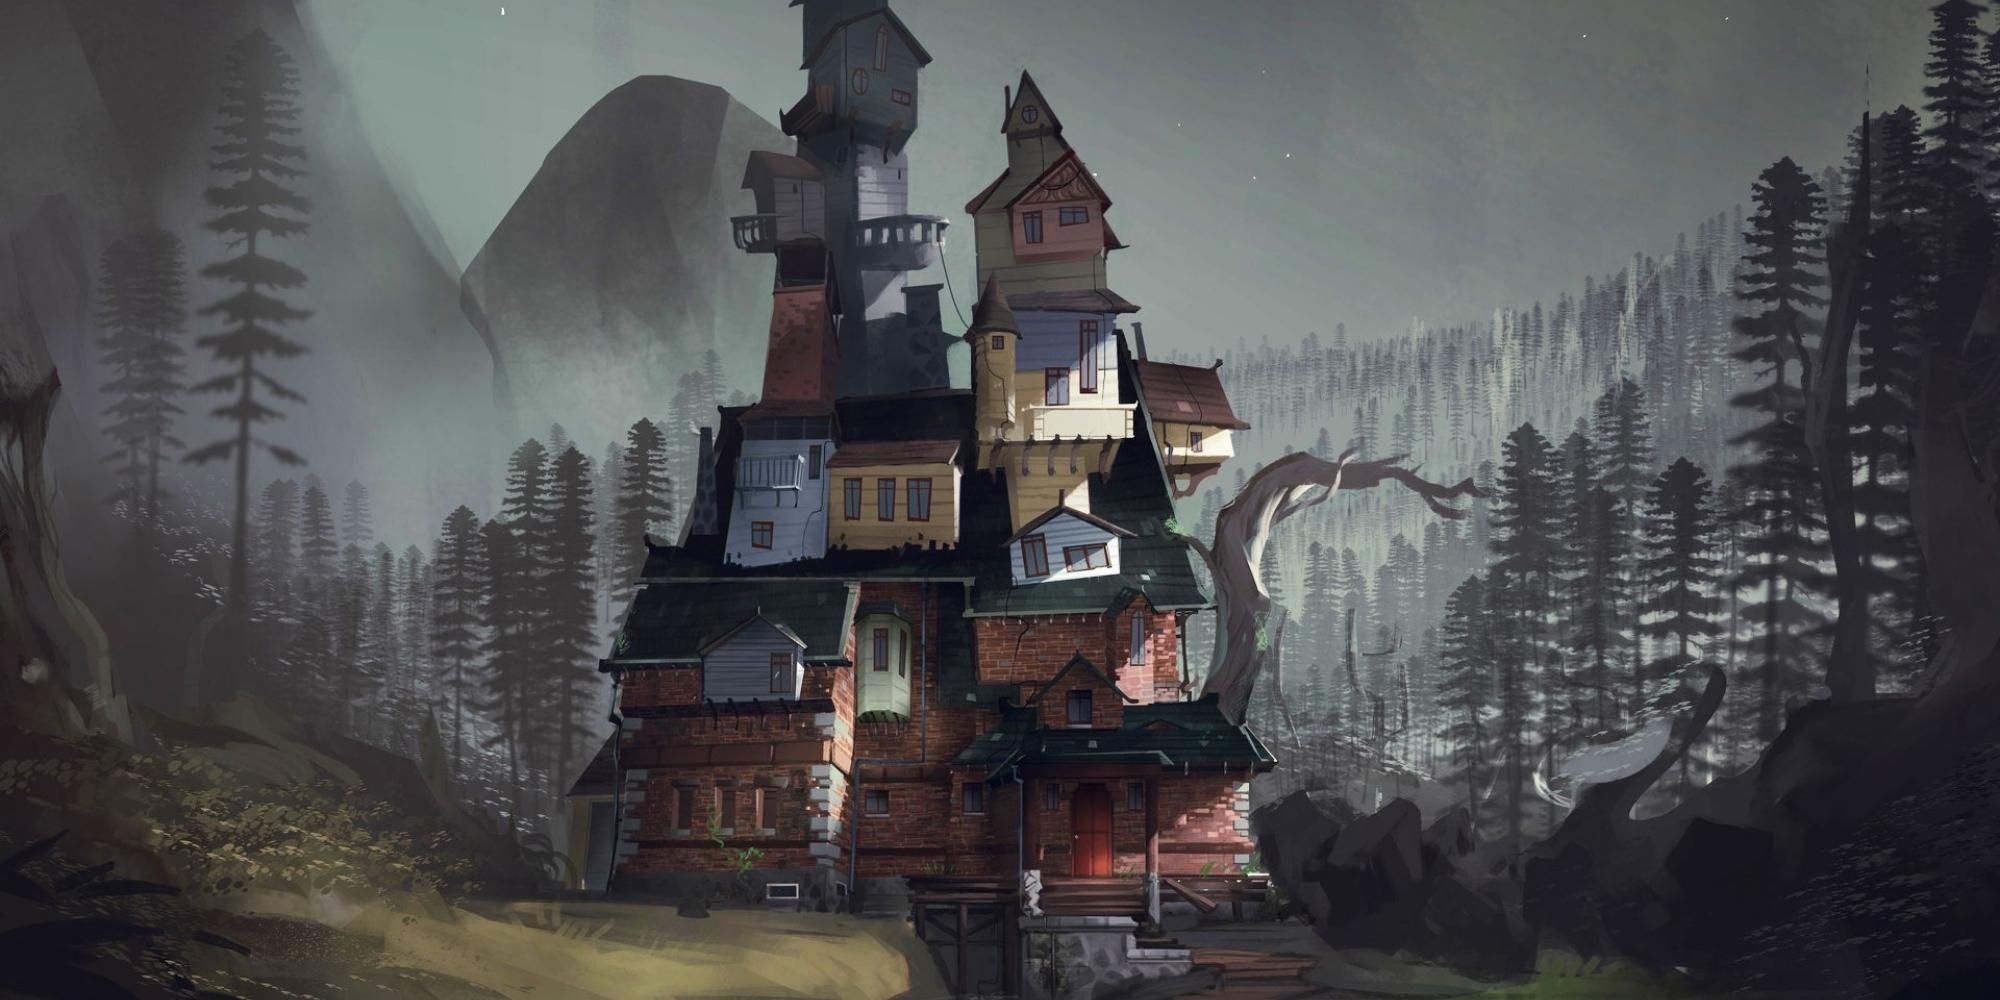 House in What Remains of Edith Finch